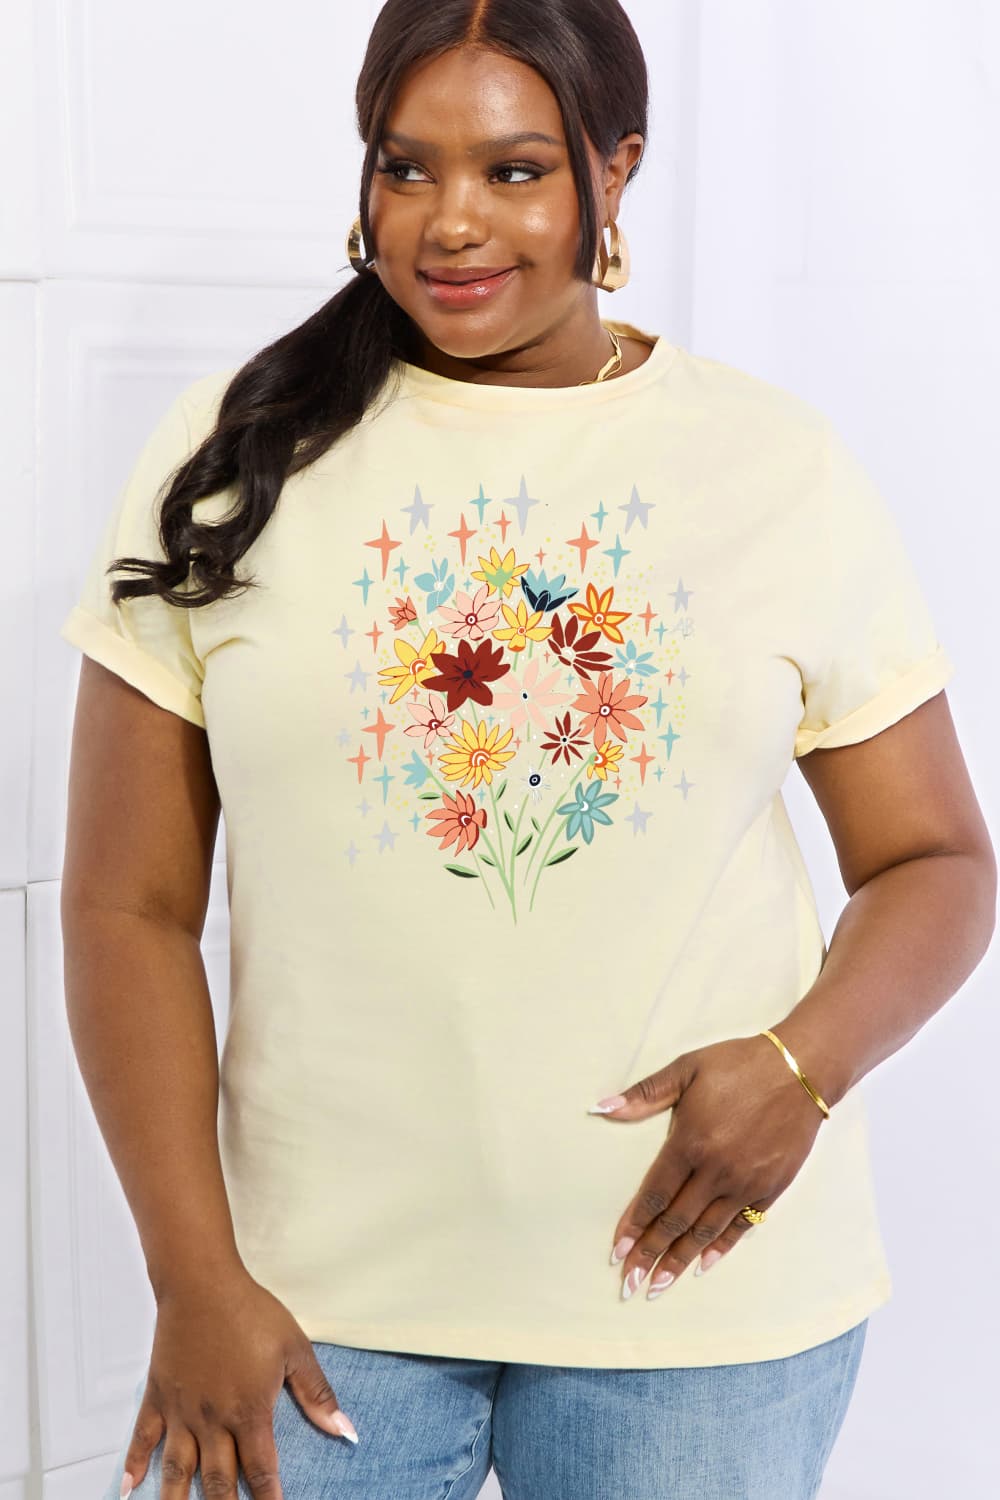 Simply Love Floral Graphic Cotton Tee